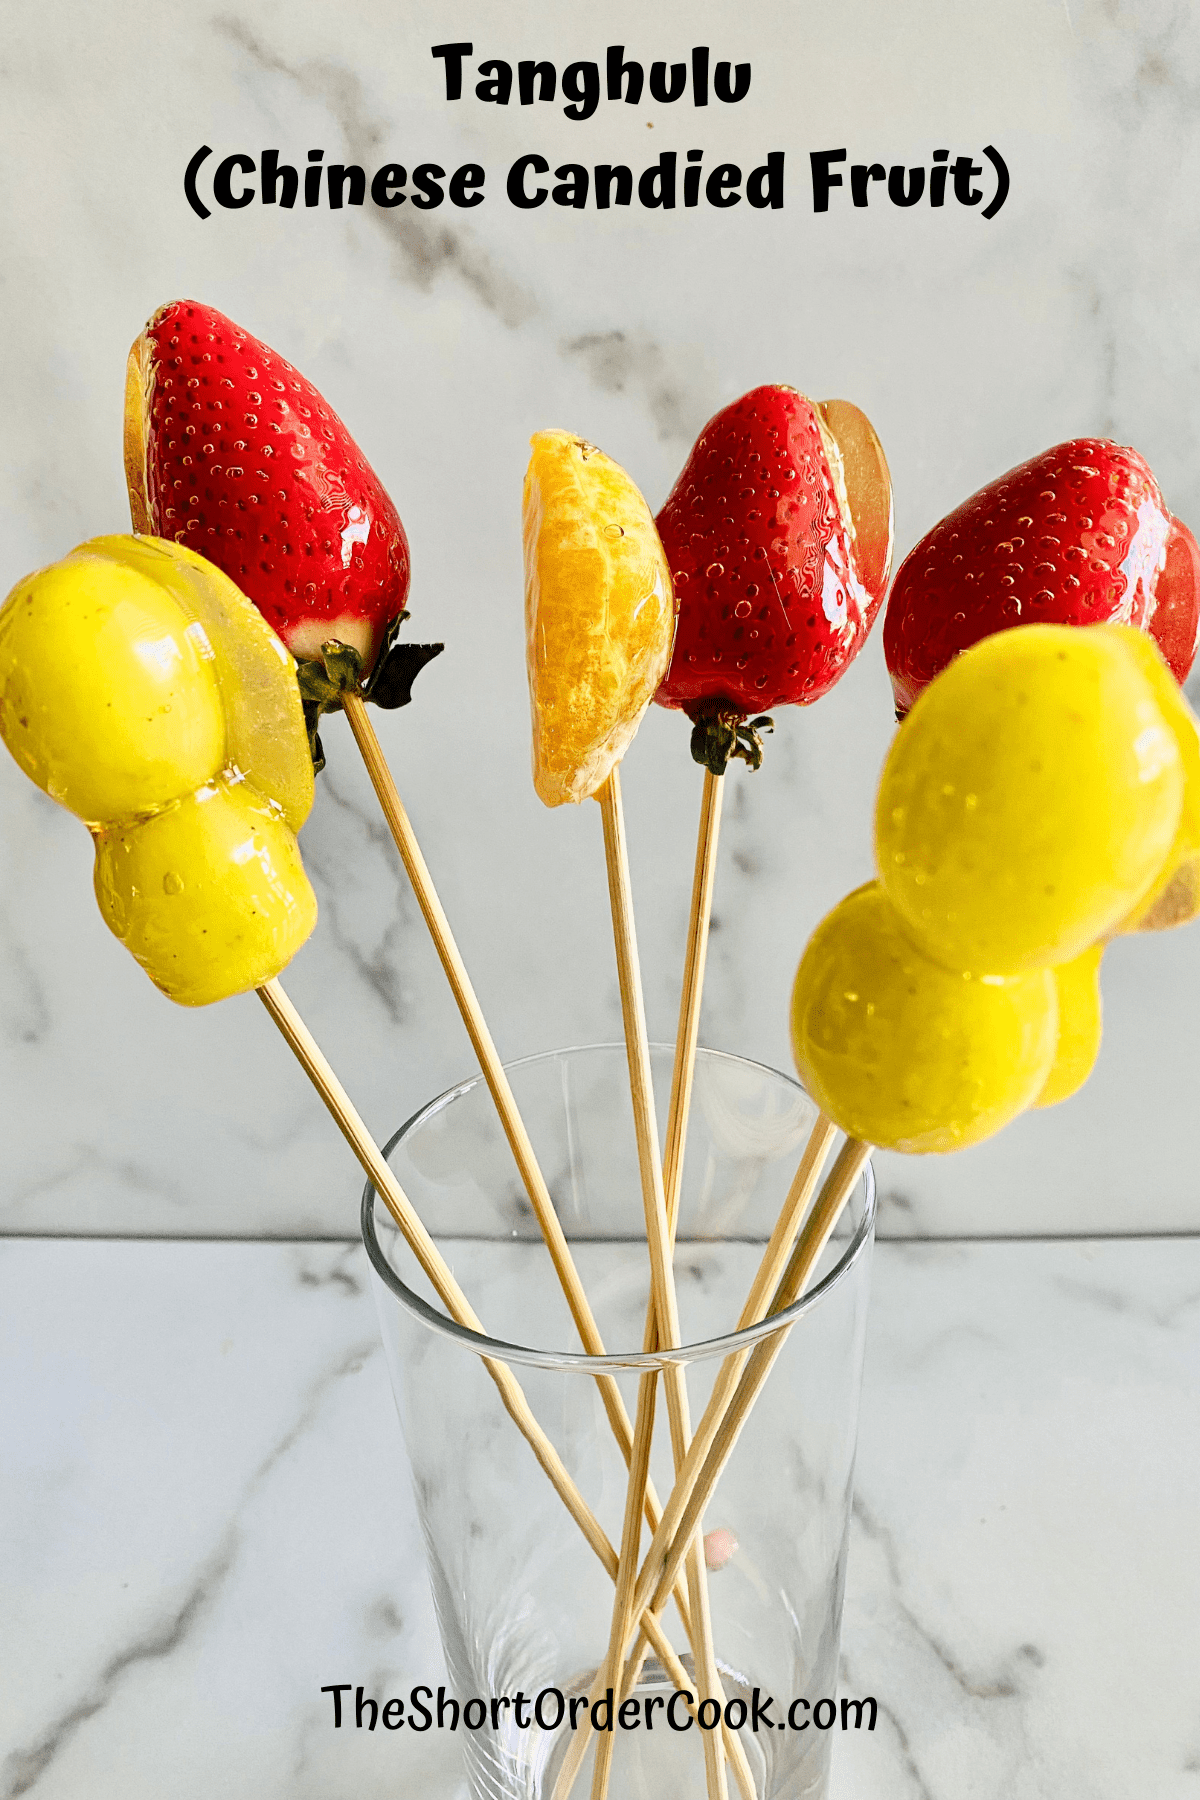 Tanghulu (Chinese Candied Fruit) skewers ready to eat.